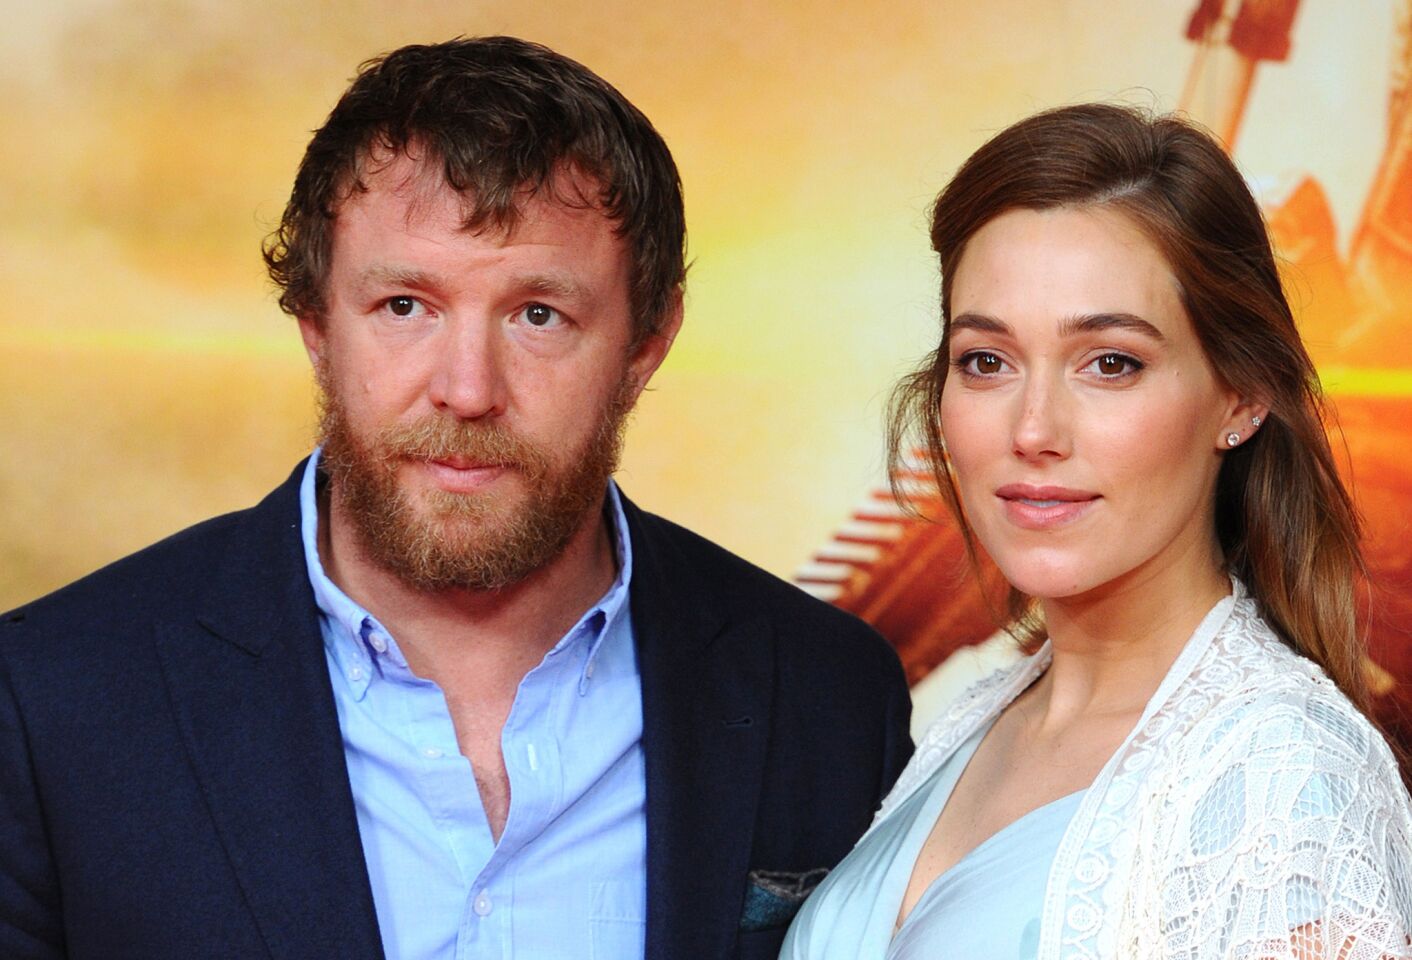 Director Guy Ritchie and his fiancee, model Jacqui Ainsley, welcomed their third child together. The little one joins daughter Rivka, born in the fall of 2012, and toddler son Rafael. Ritchie is also father to sons David, 8, and Rocco, 13, with ex-wife Madonna.